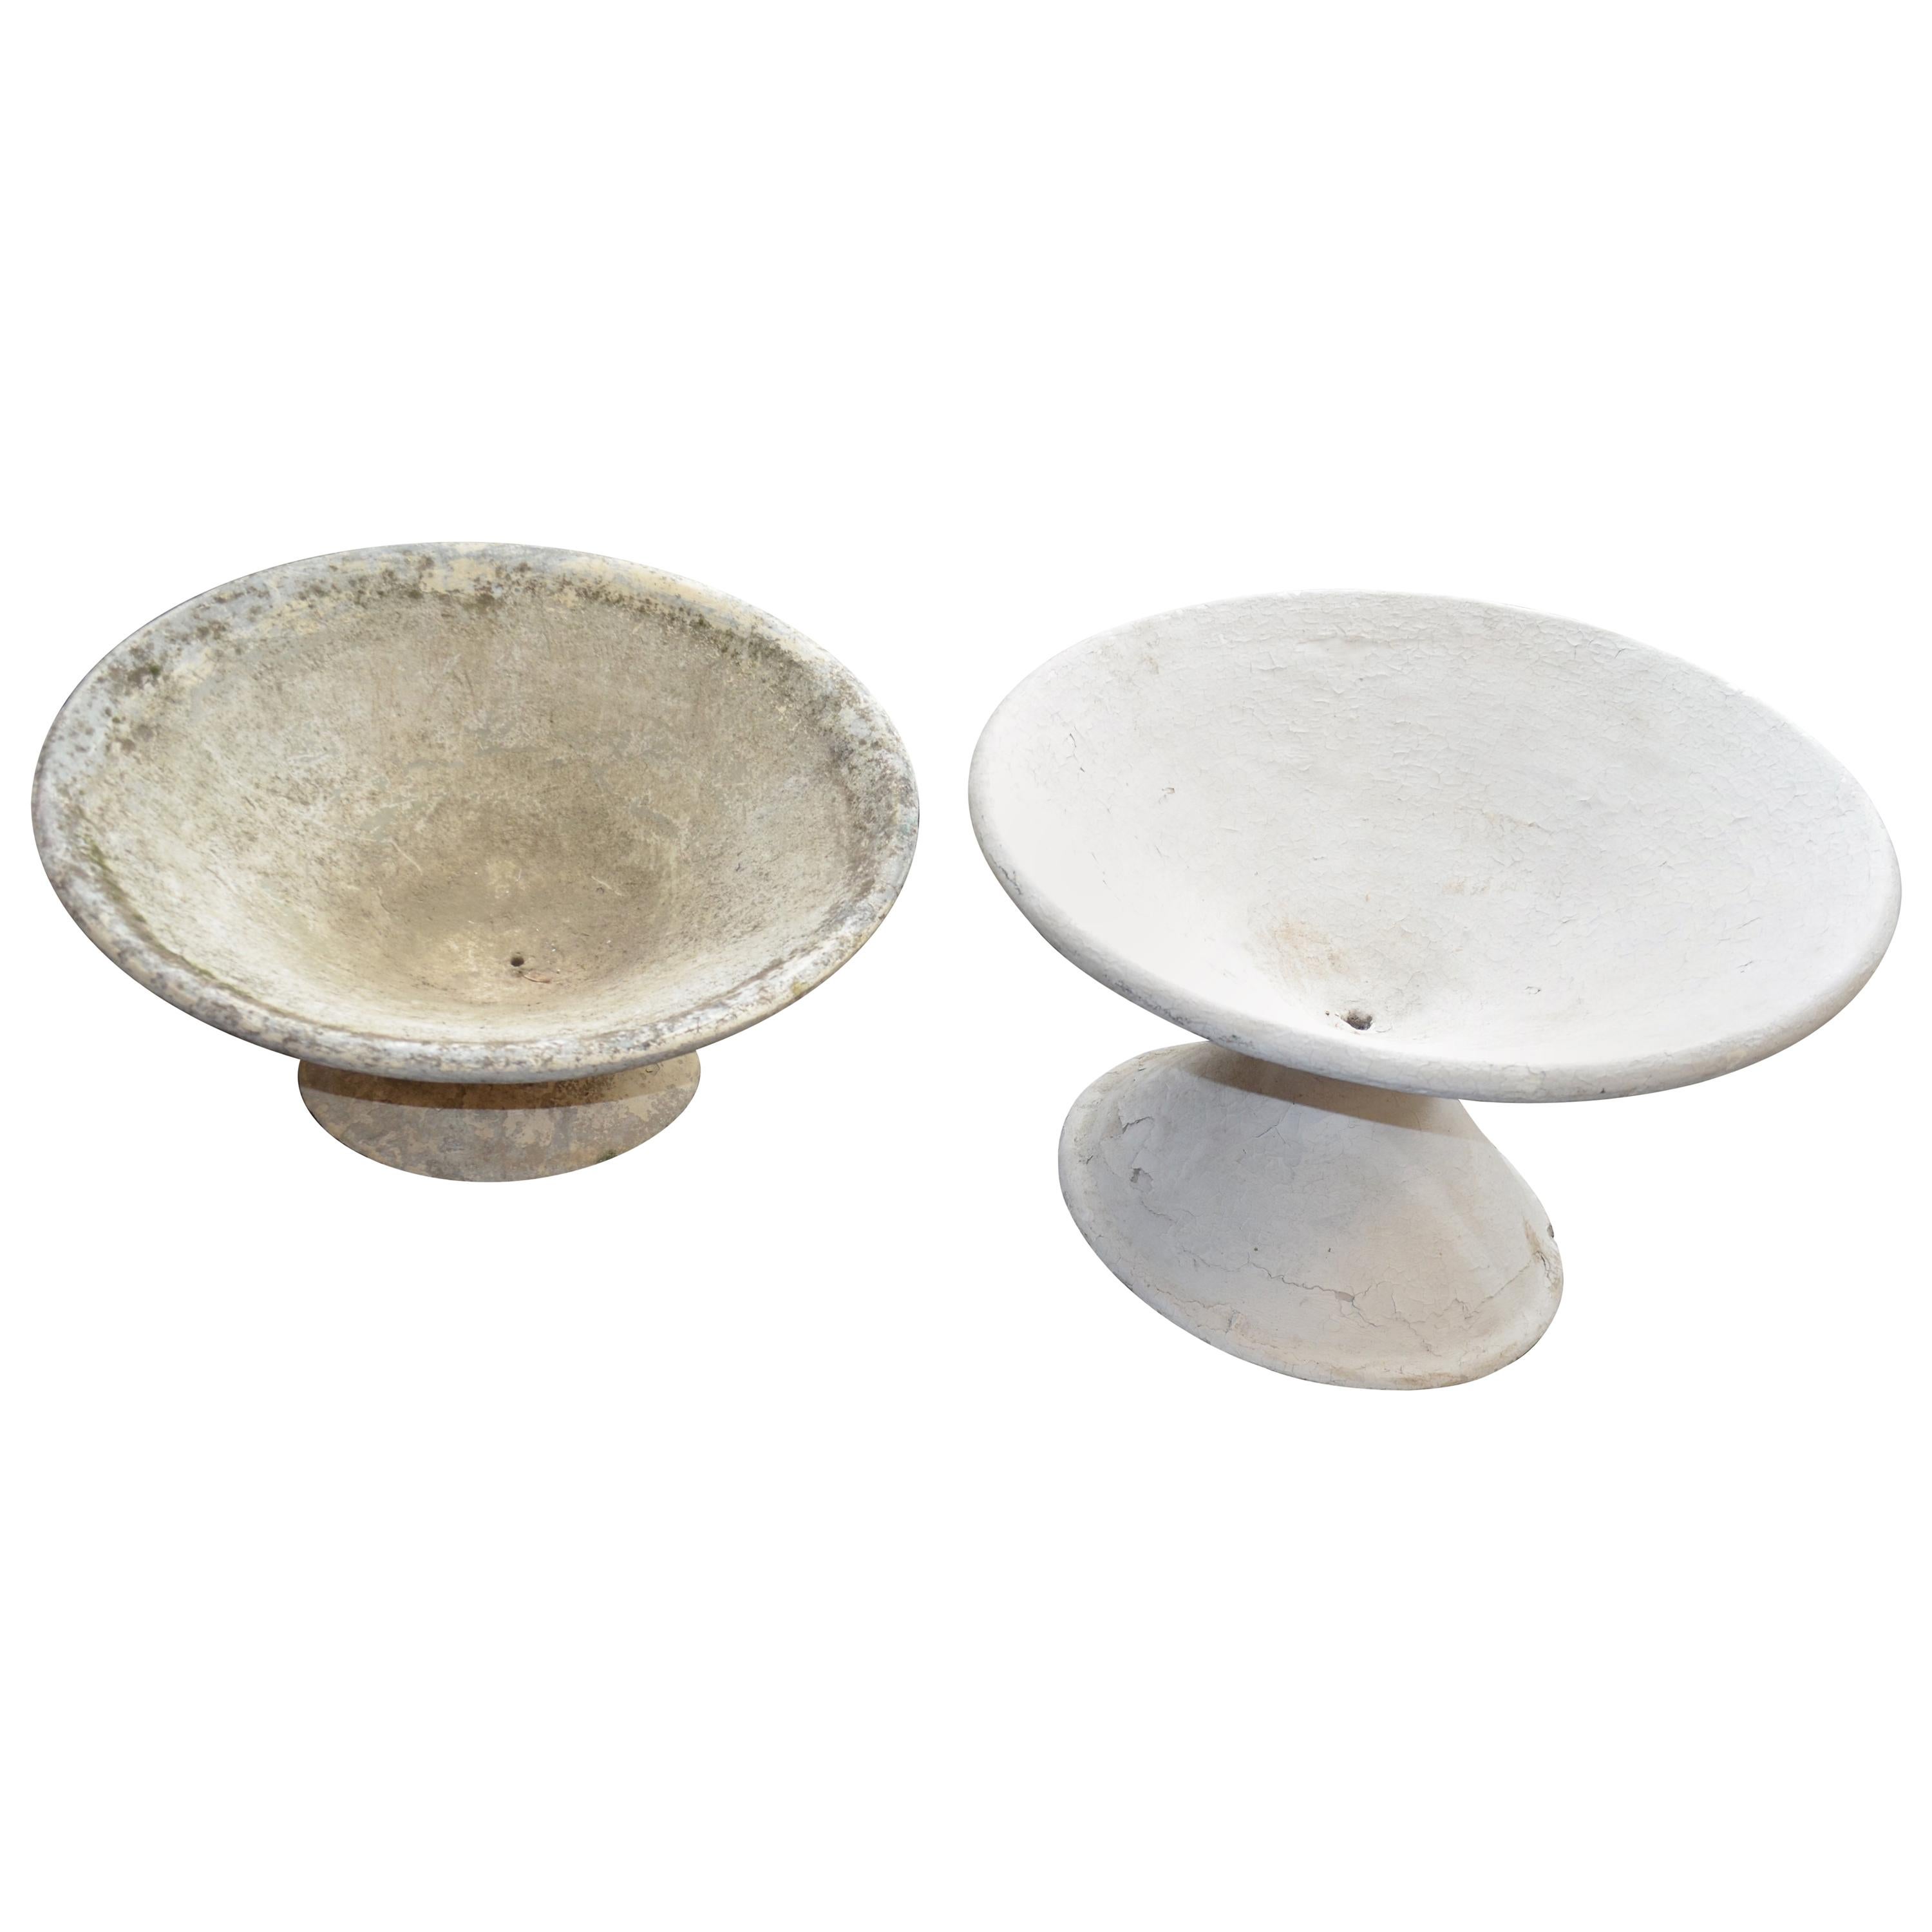 Garden Planters of Saucer Formed Stone by Willy Guhl, Offered as a Pair